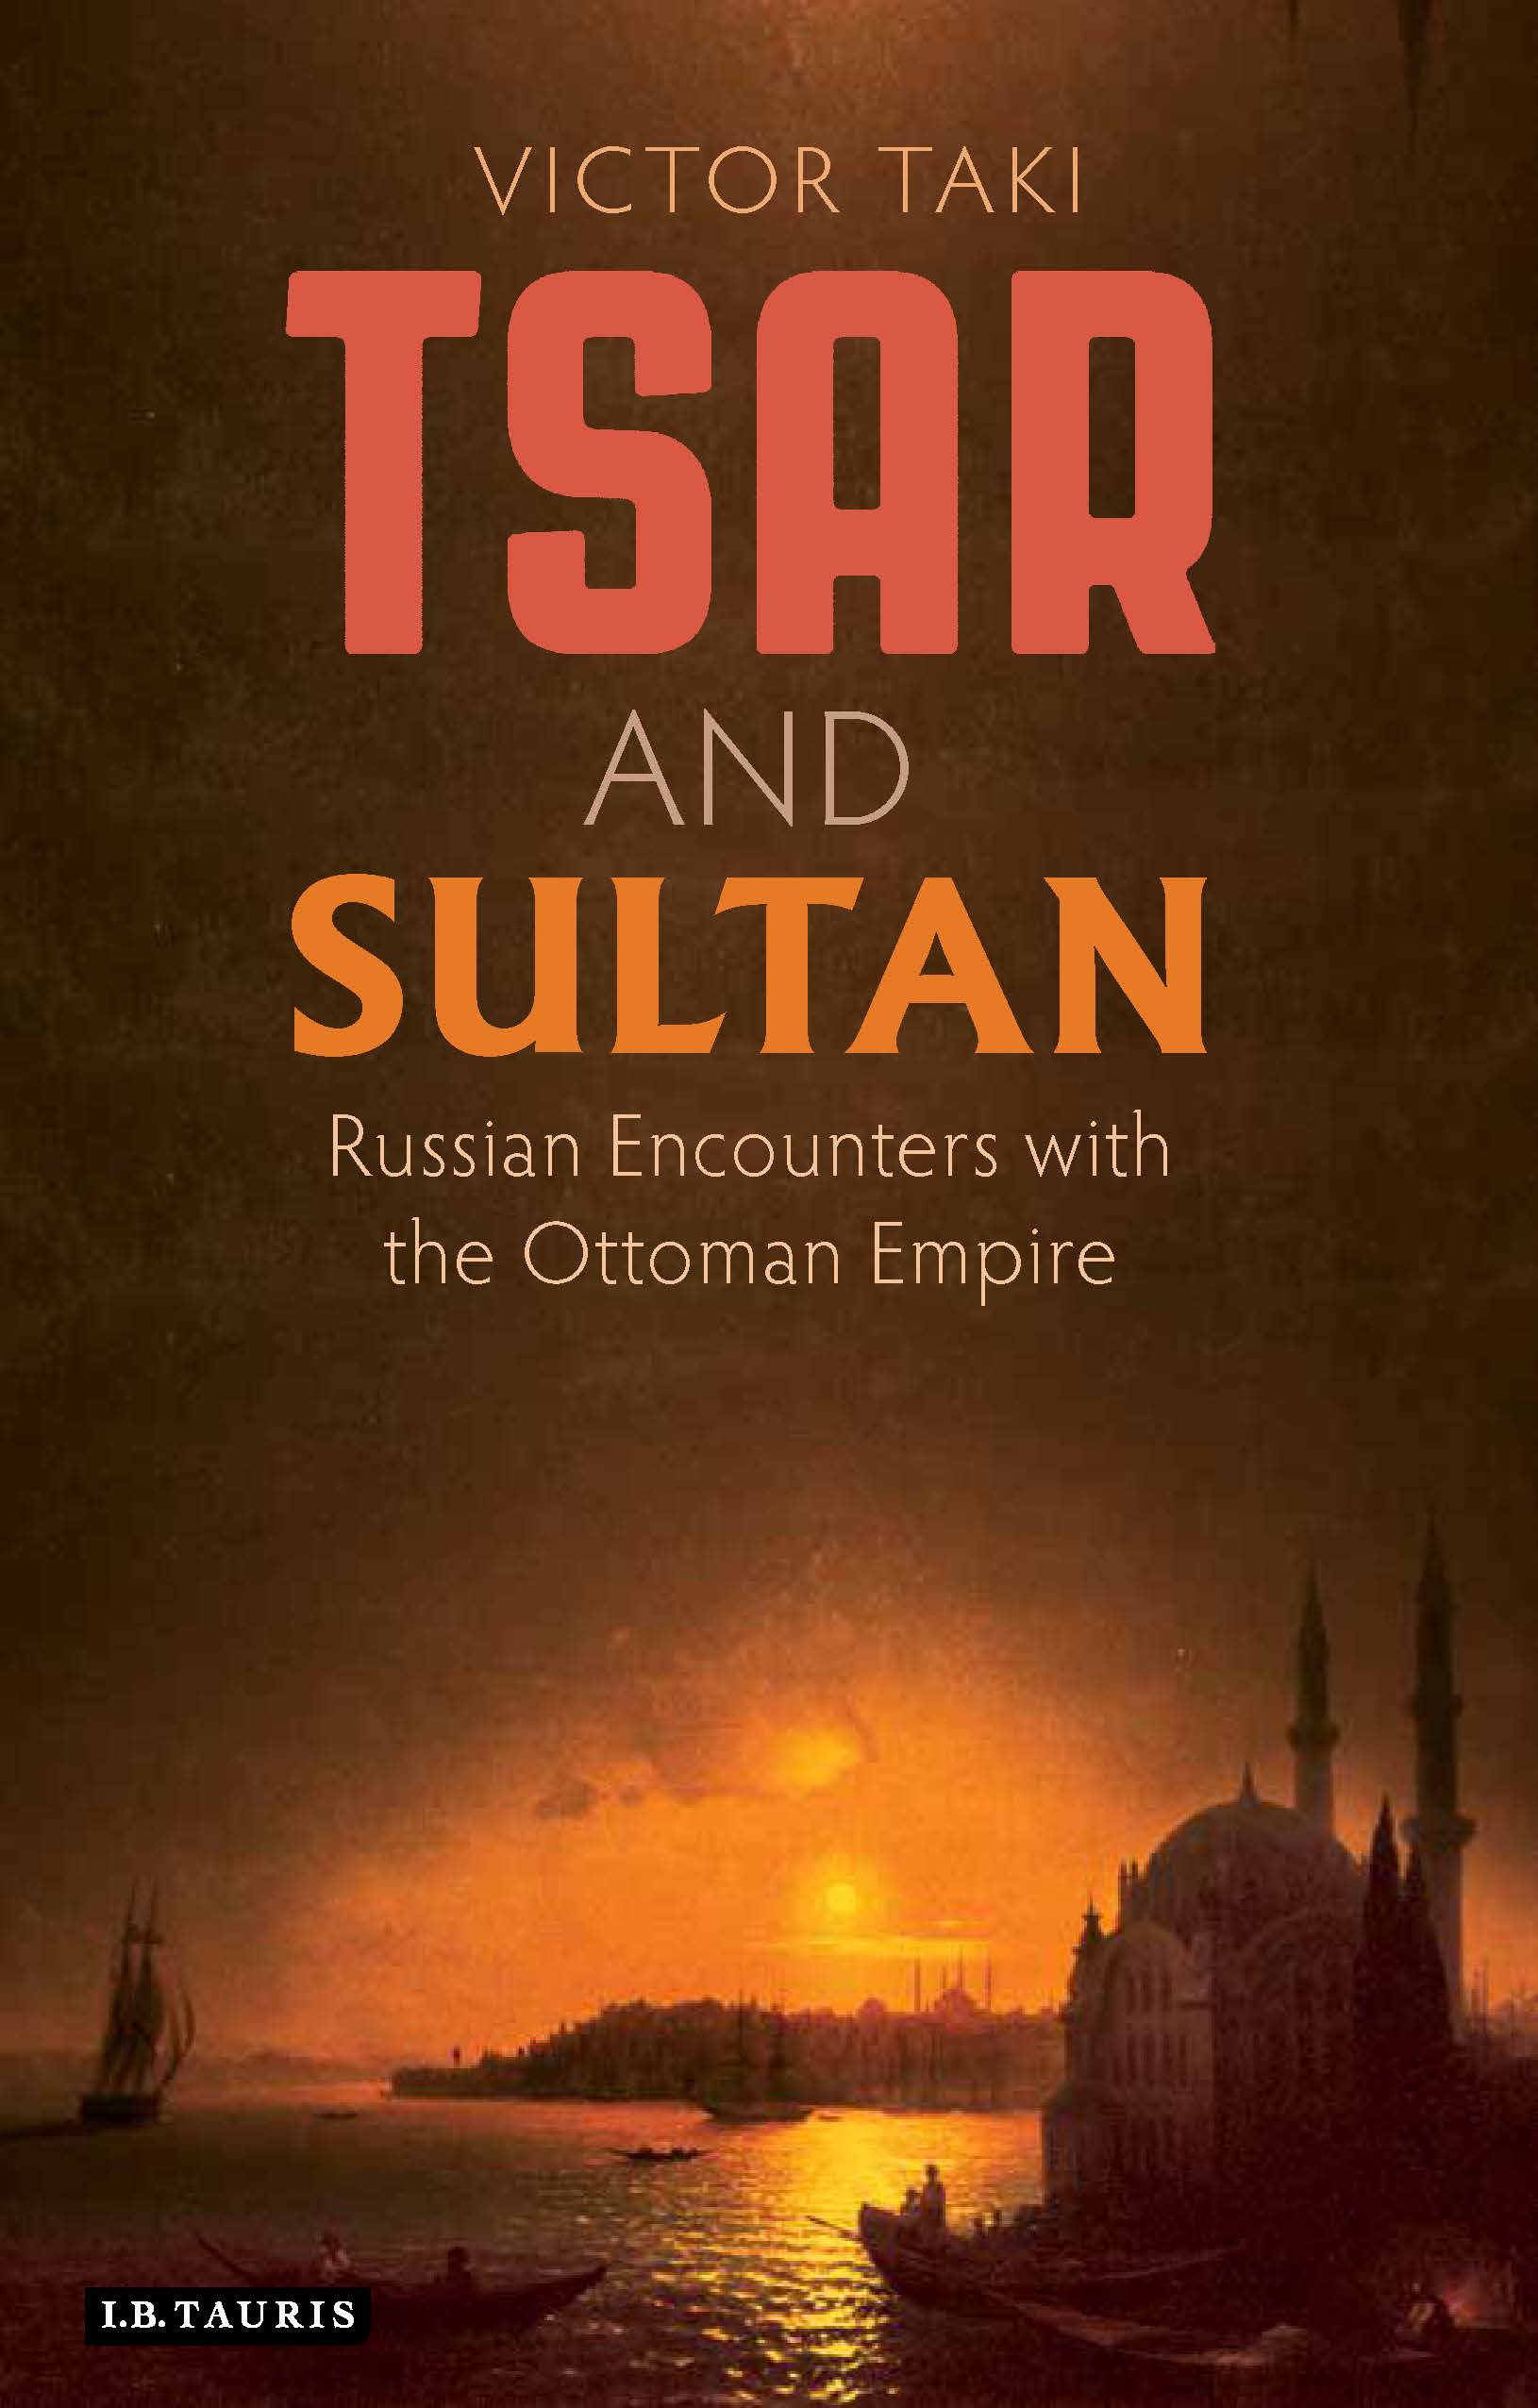 Tsar and Sultan approved 2